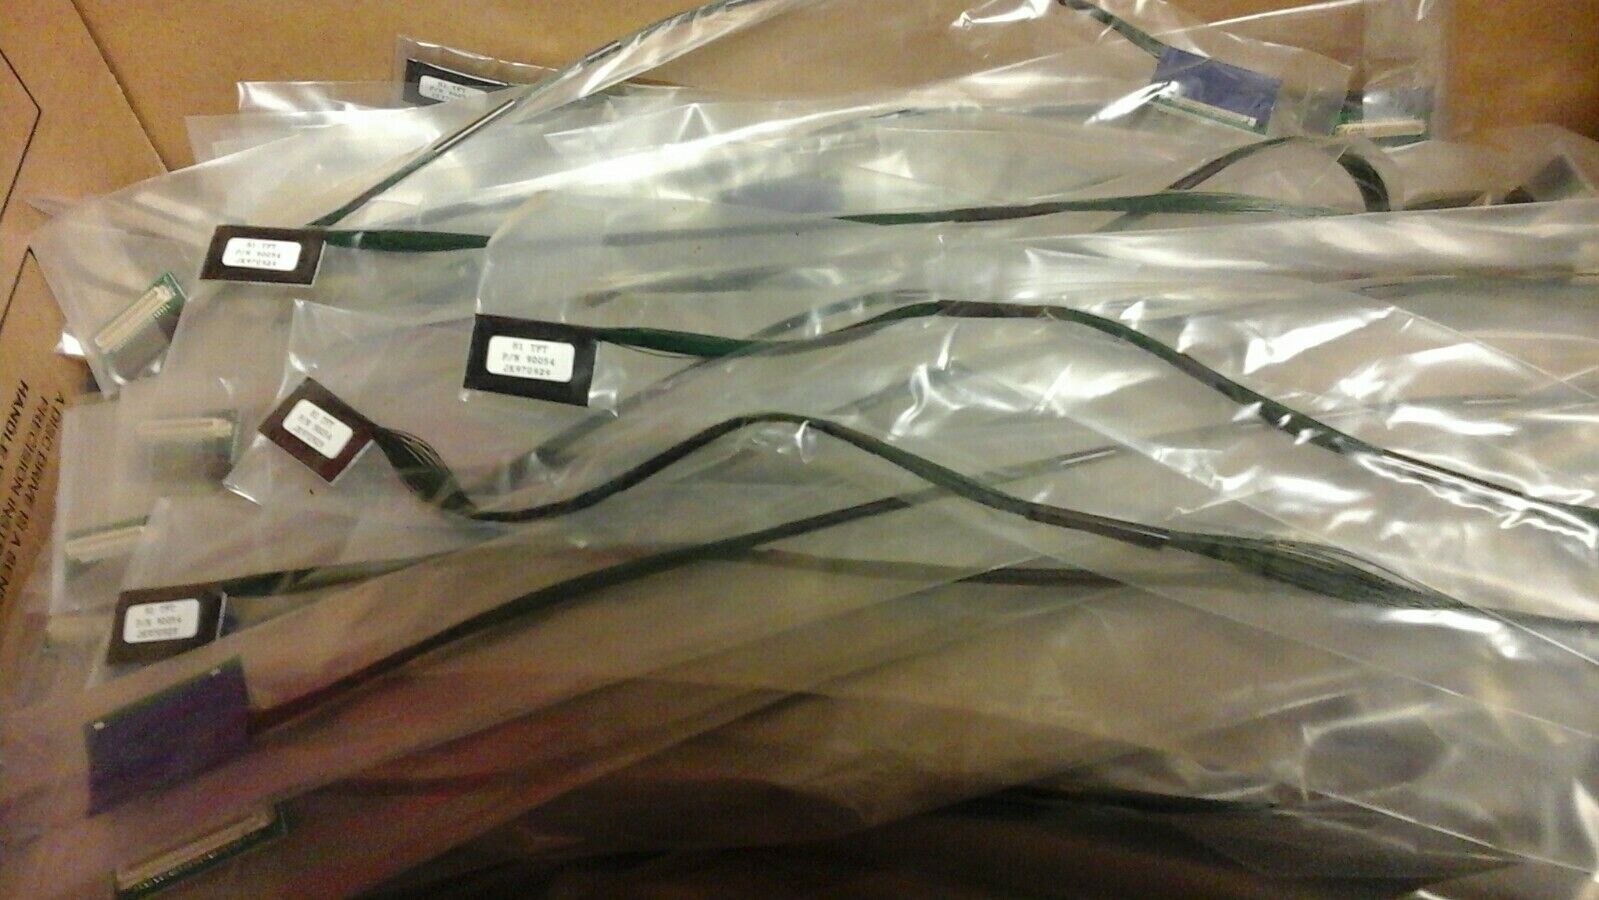 LCD  Display Cables-Brand New-$3 a piece-Selling as Lot- 240pcs - OFFER